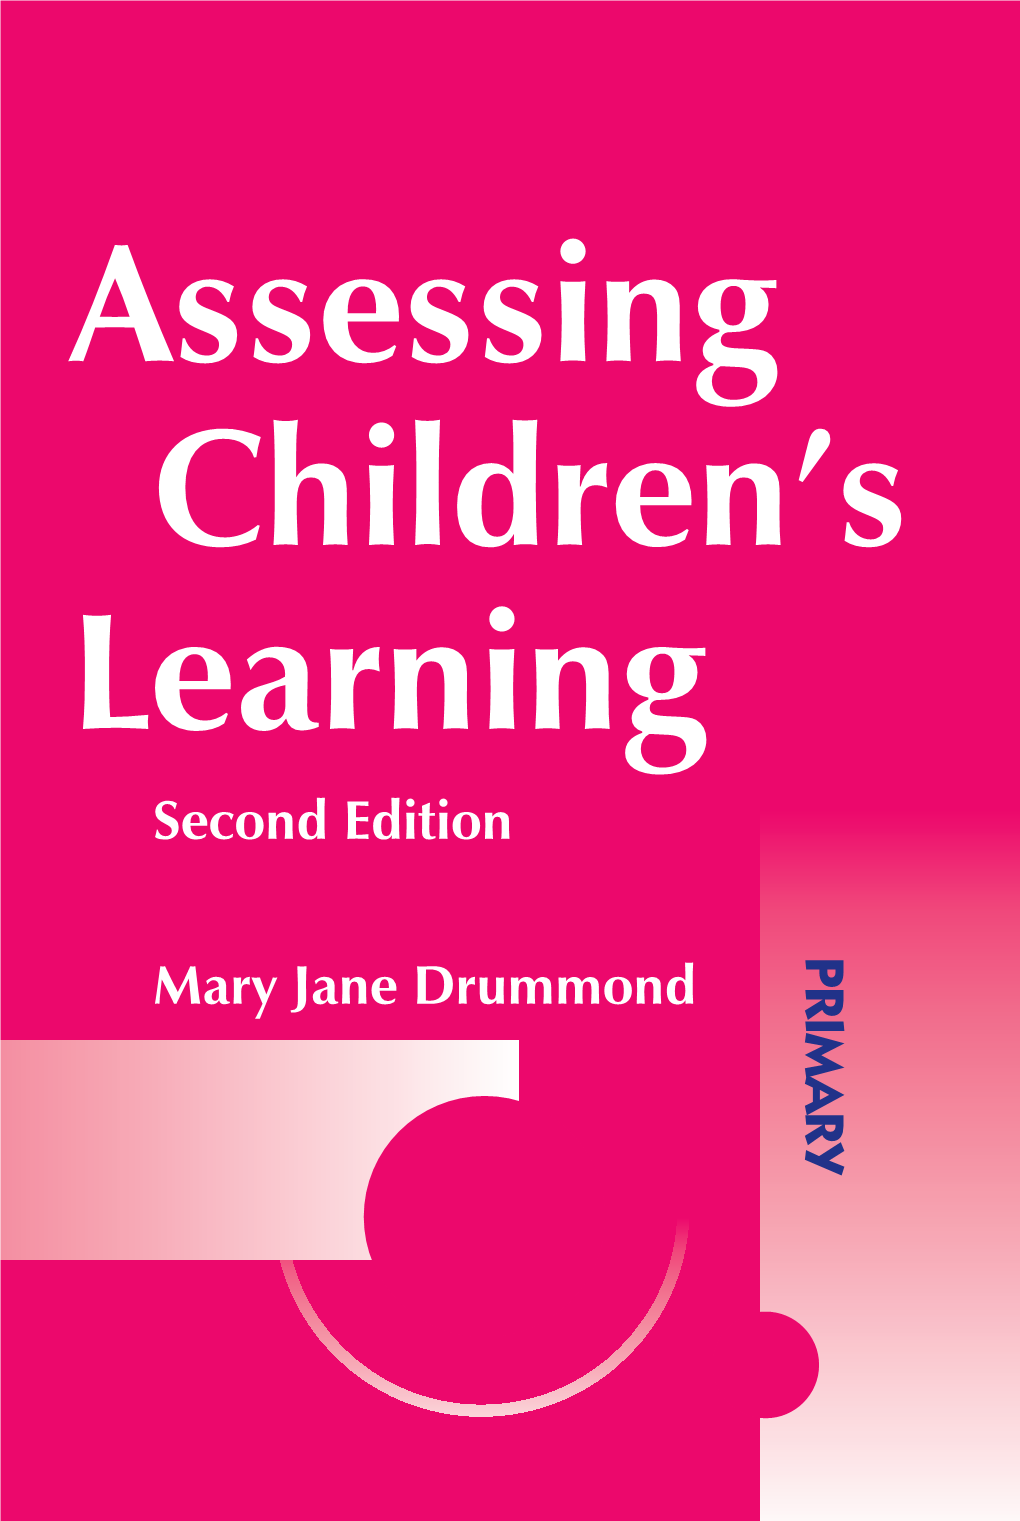 Second Edition Mary Jane Drummond